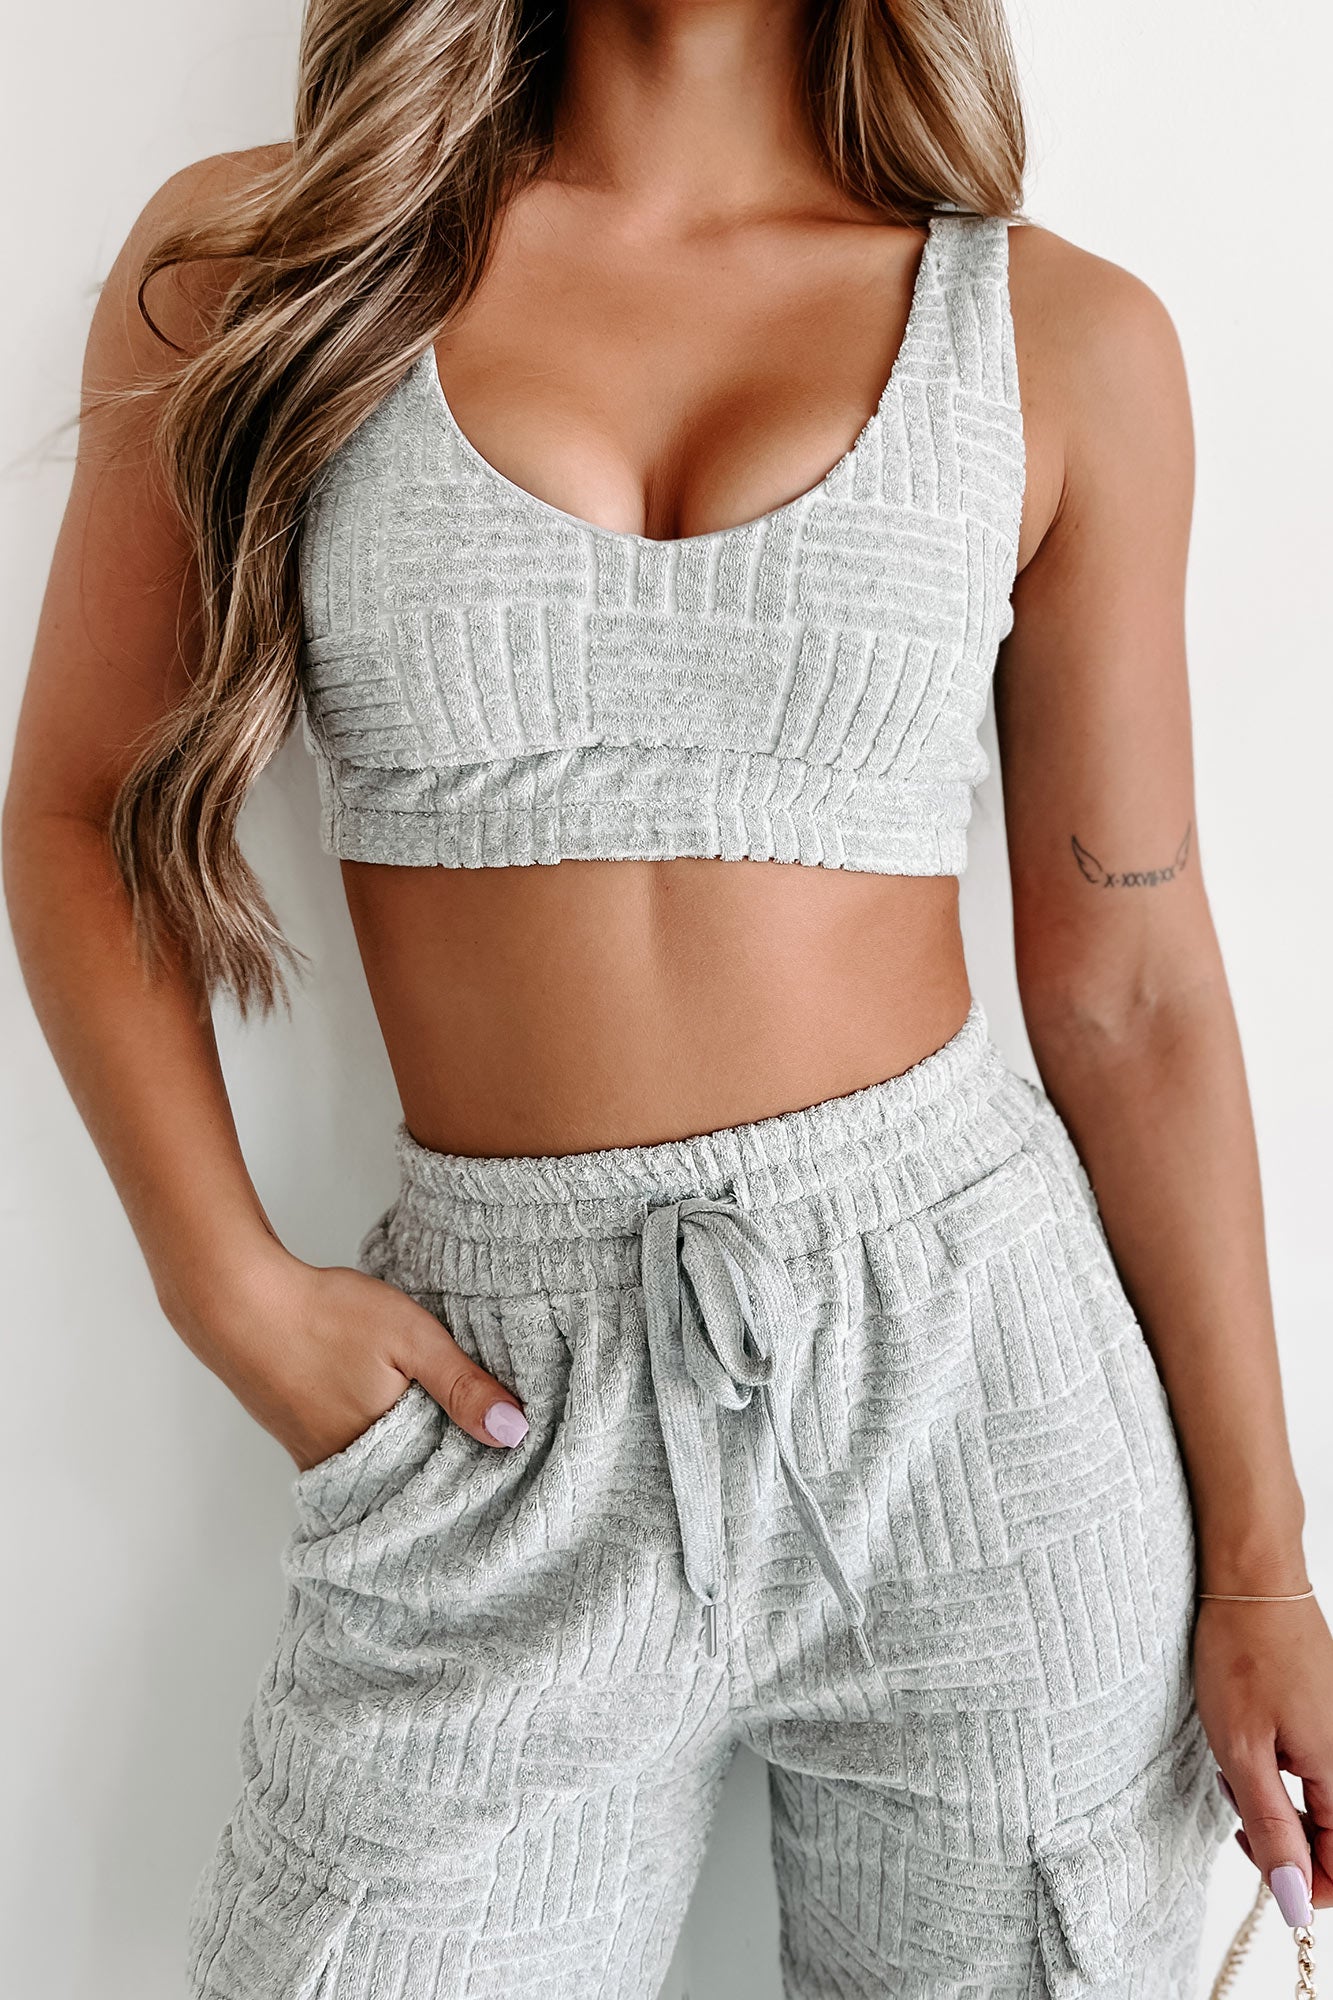 Can't Be Like Me Textured Crop Top (Heather Grey) - NanaMacs